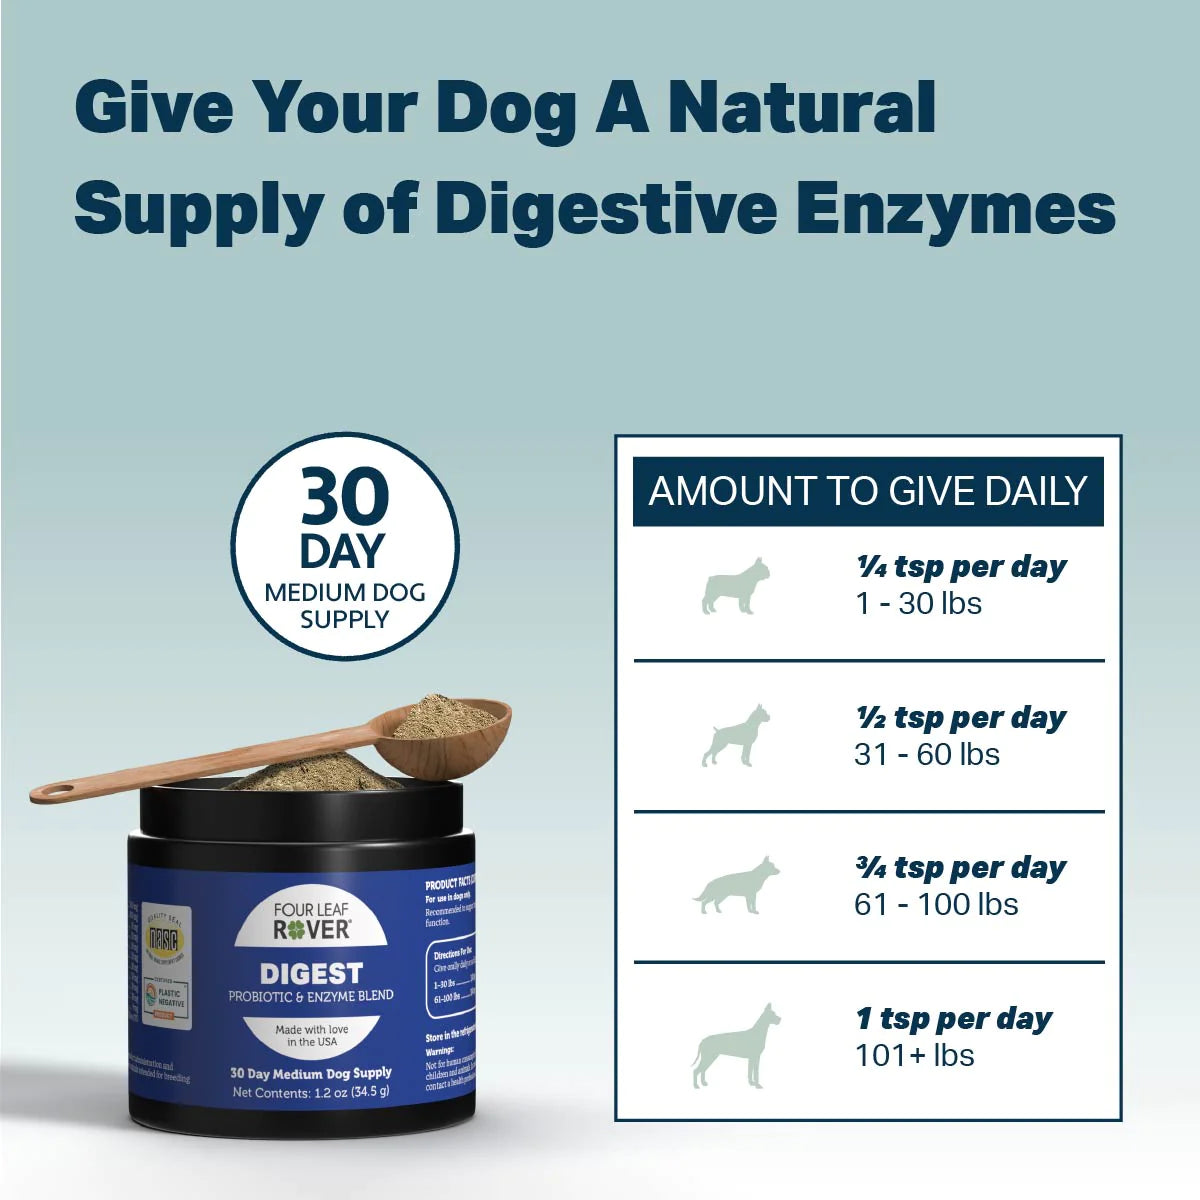 Four Leaf Rover Digest | Digestive Enzymes for Dogs